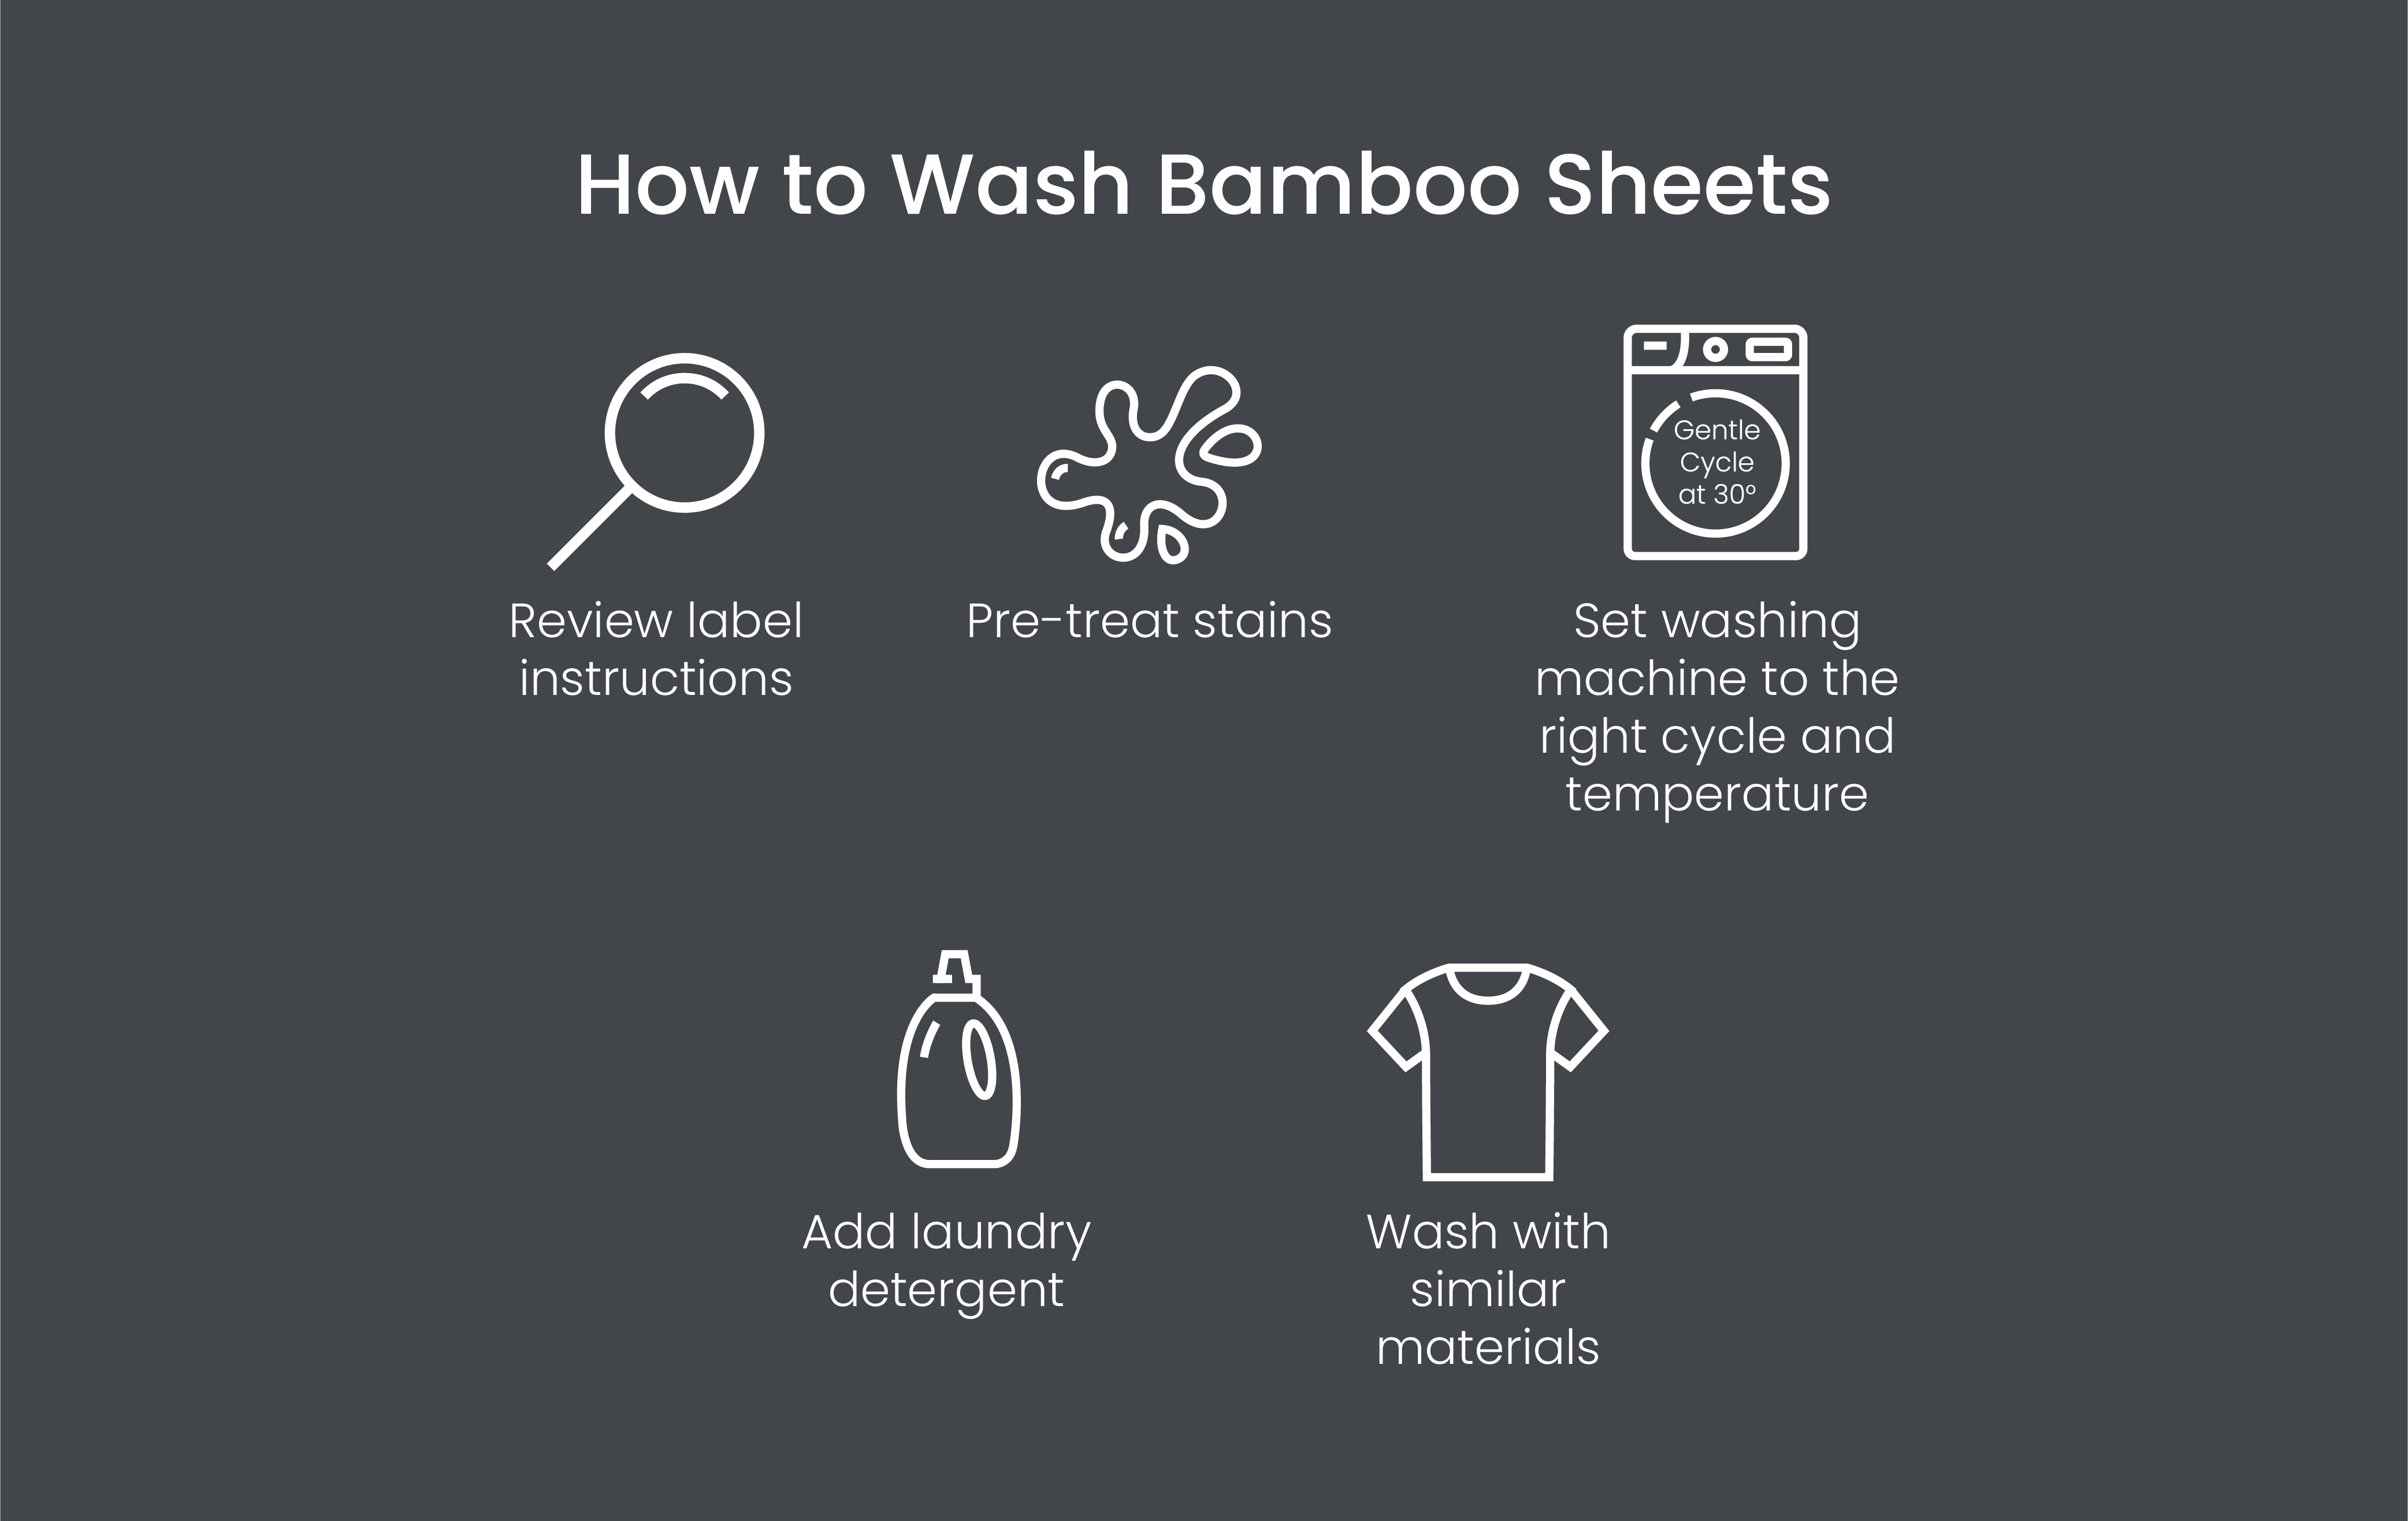 How to wash bamboo sheets